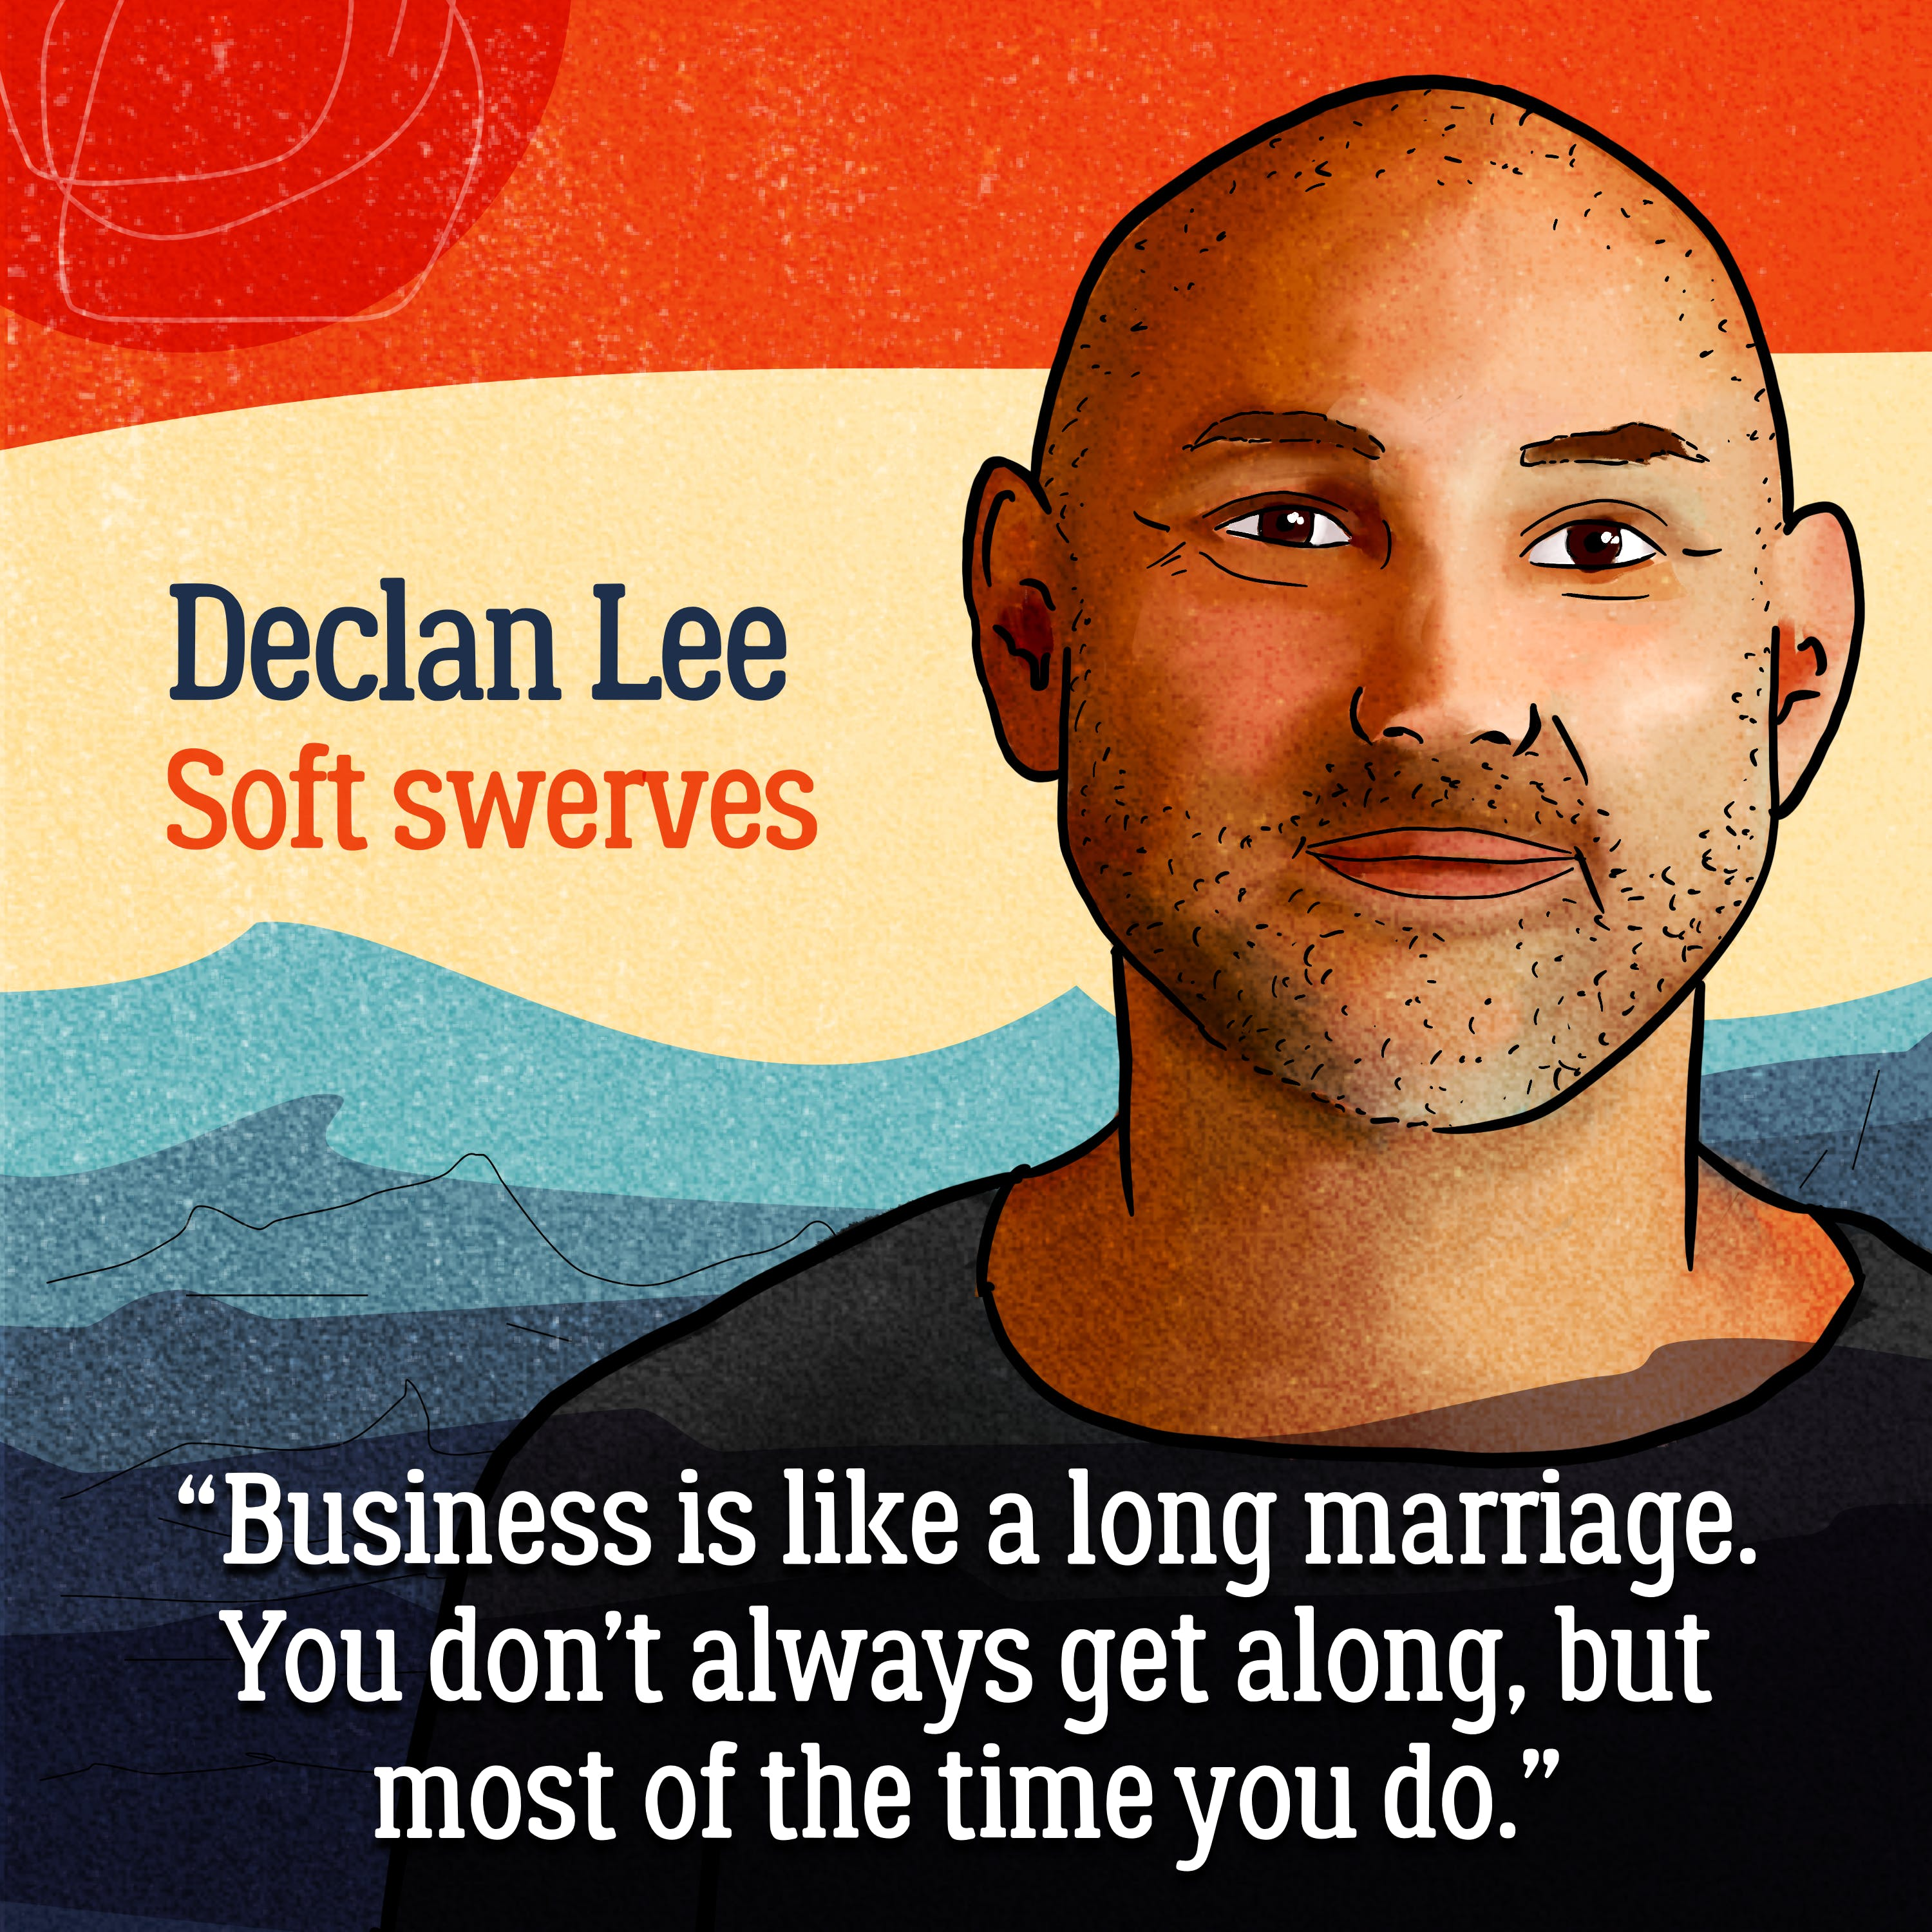 Soft swerves — Declan Lee scoops himself up from failure to create an ice-cream empire